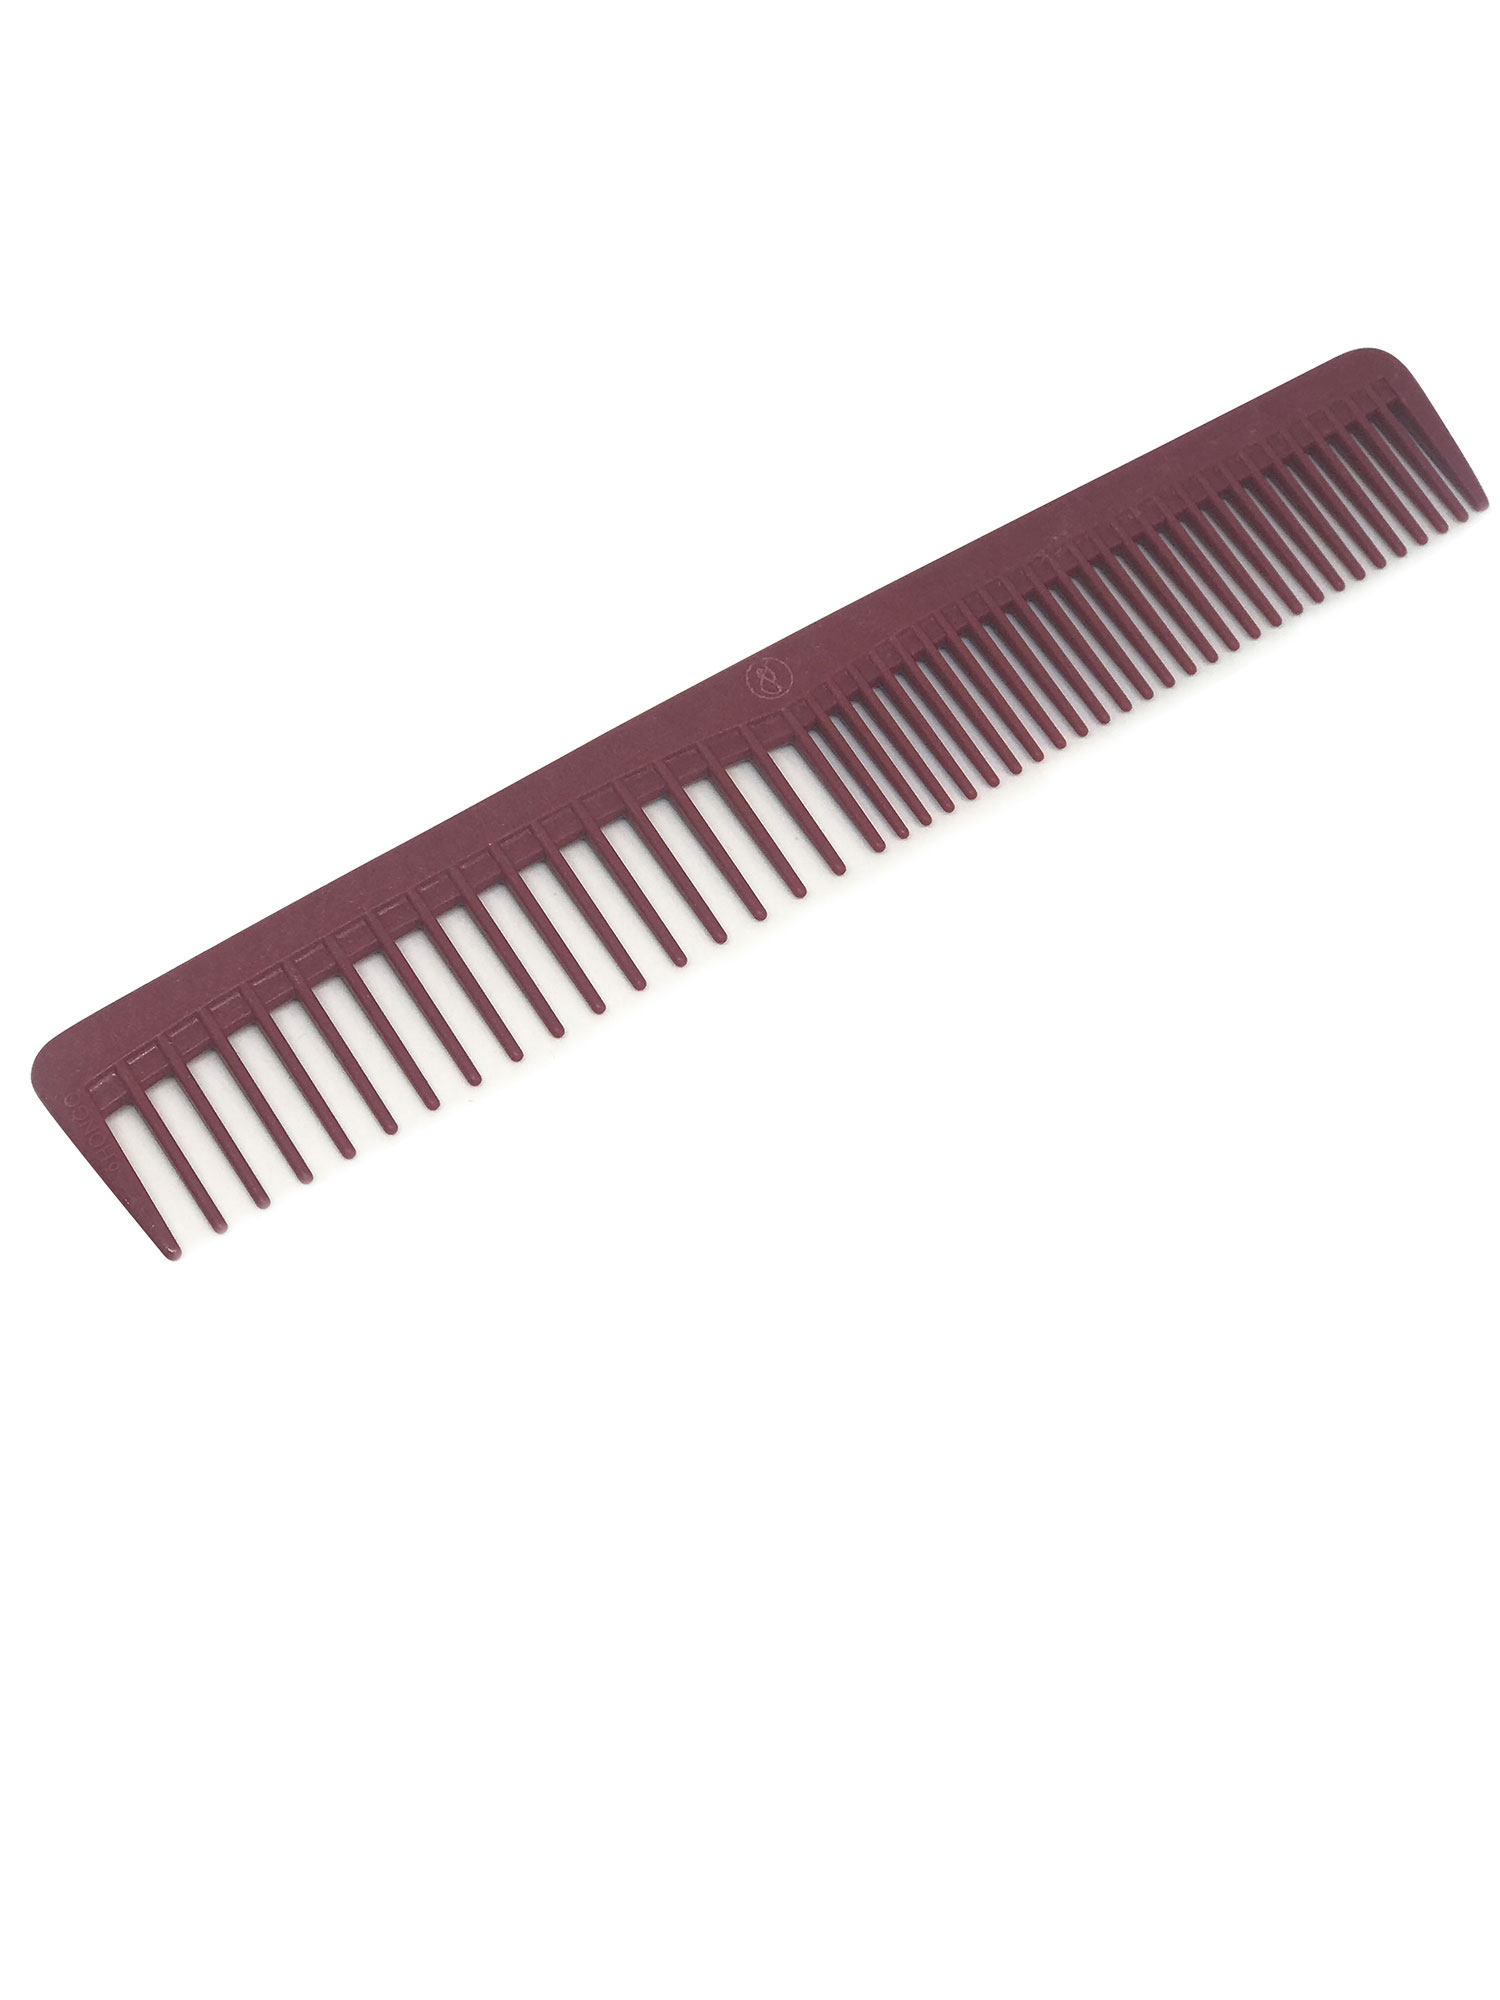 THE GS RED COMB